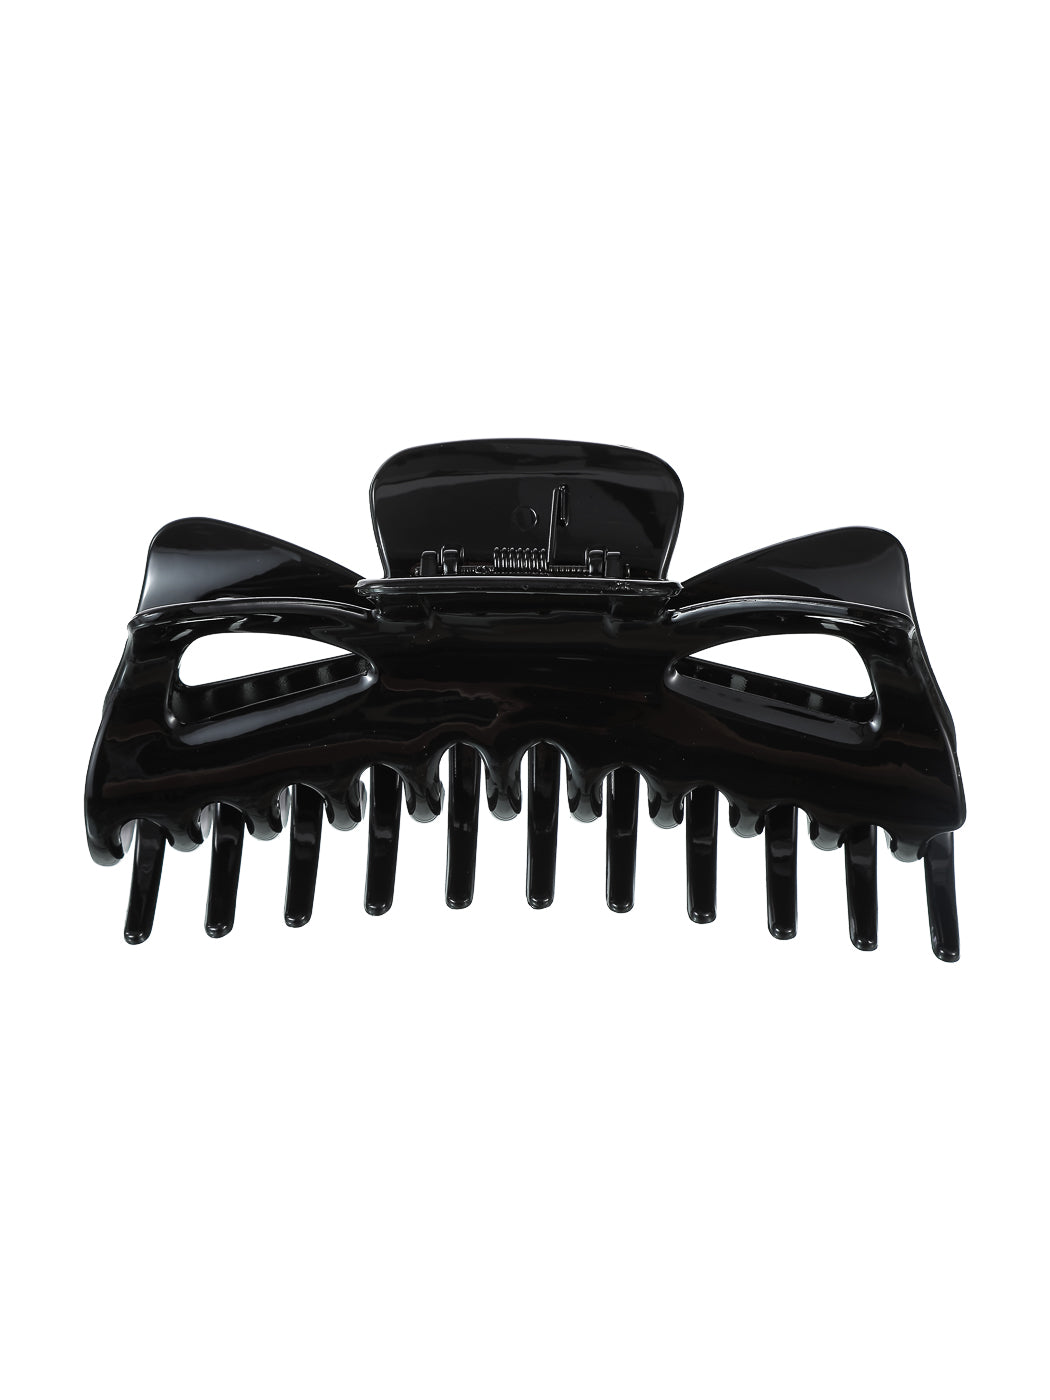 MINISO CLASSIC ULTRA LARGE HAIR CLAW CLIP 2010396710108 HAIR CLIPPERS